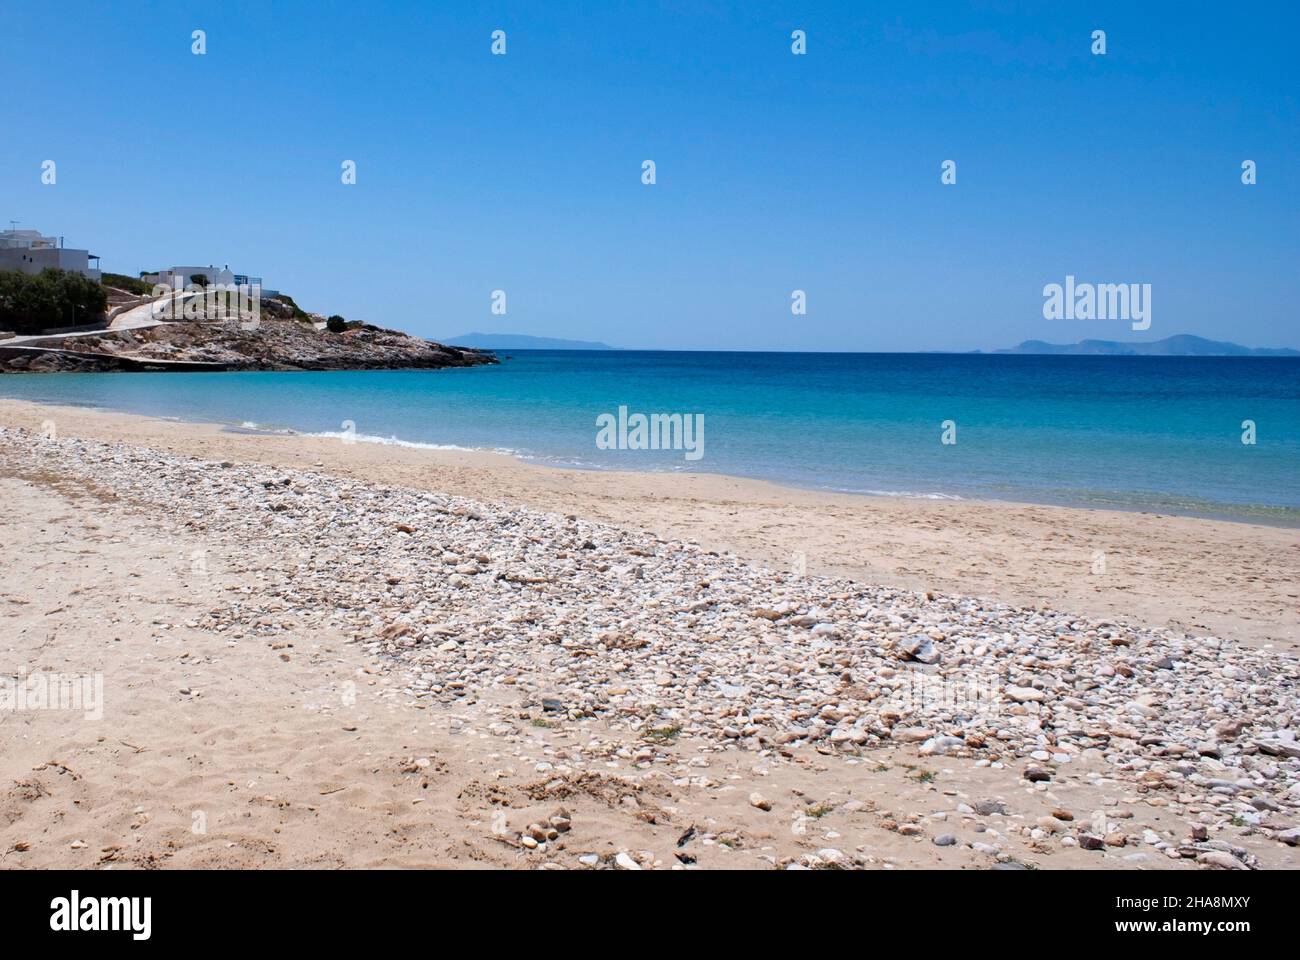 Beautiful sandy beach, Donousa island, Cyclades, Greece. A secluded destination with soft sand on a summer day.  Landscape aspect shot. Stock Photo